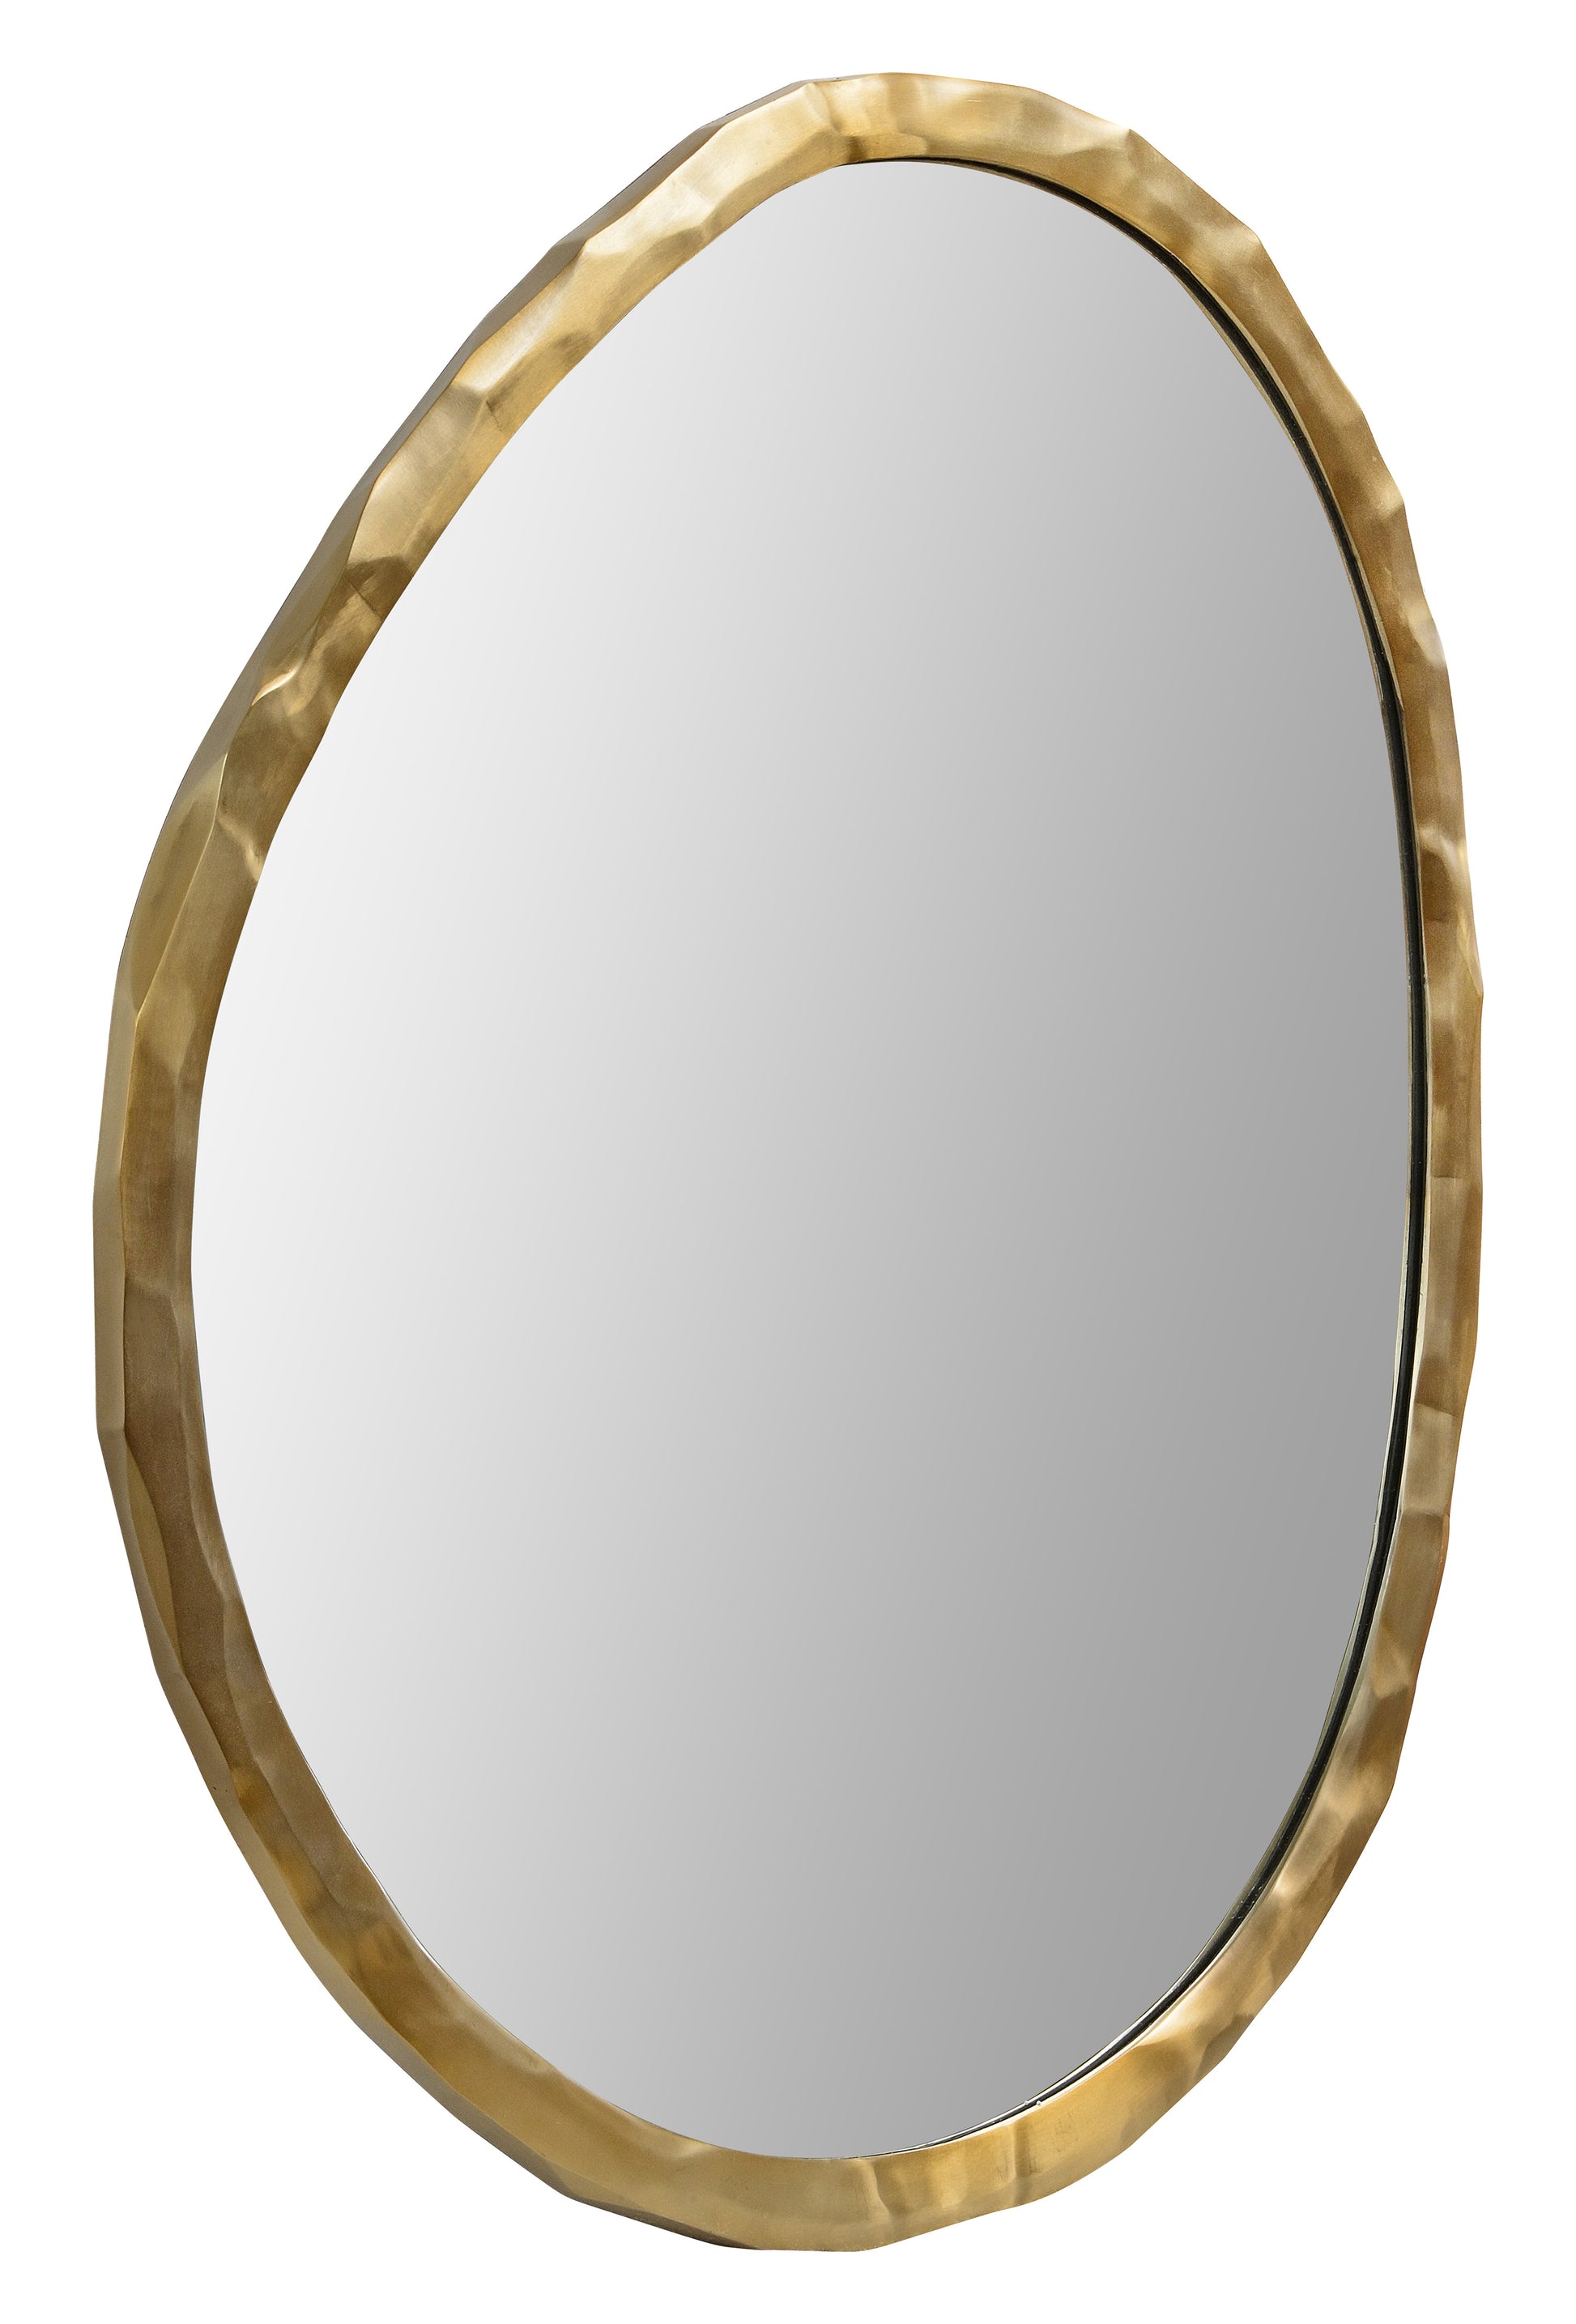 Asymmetrical mirror steel frame in plated light bronze and hammered texture.